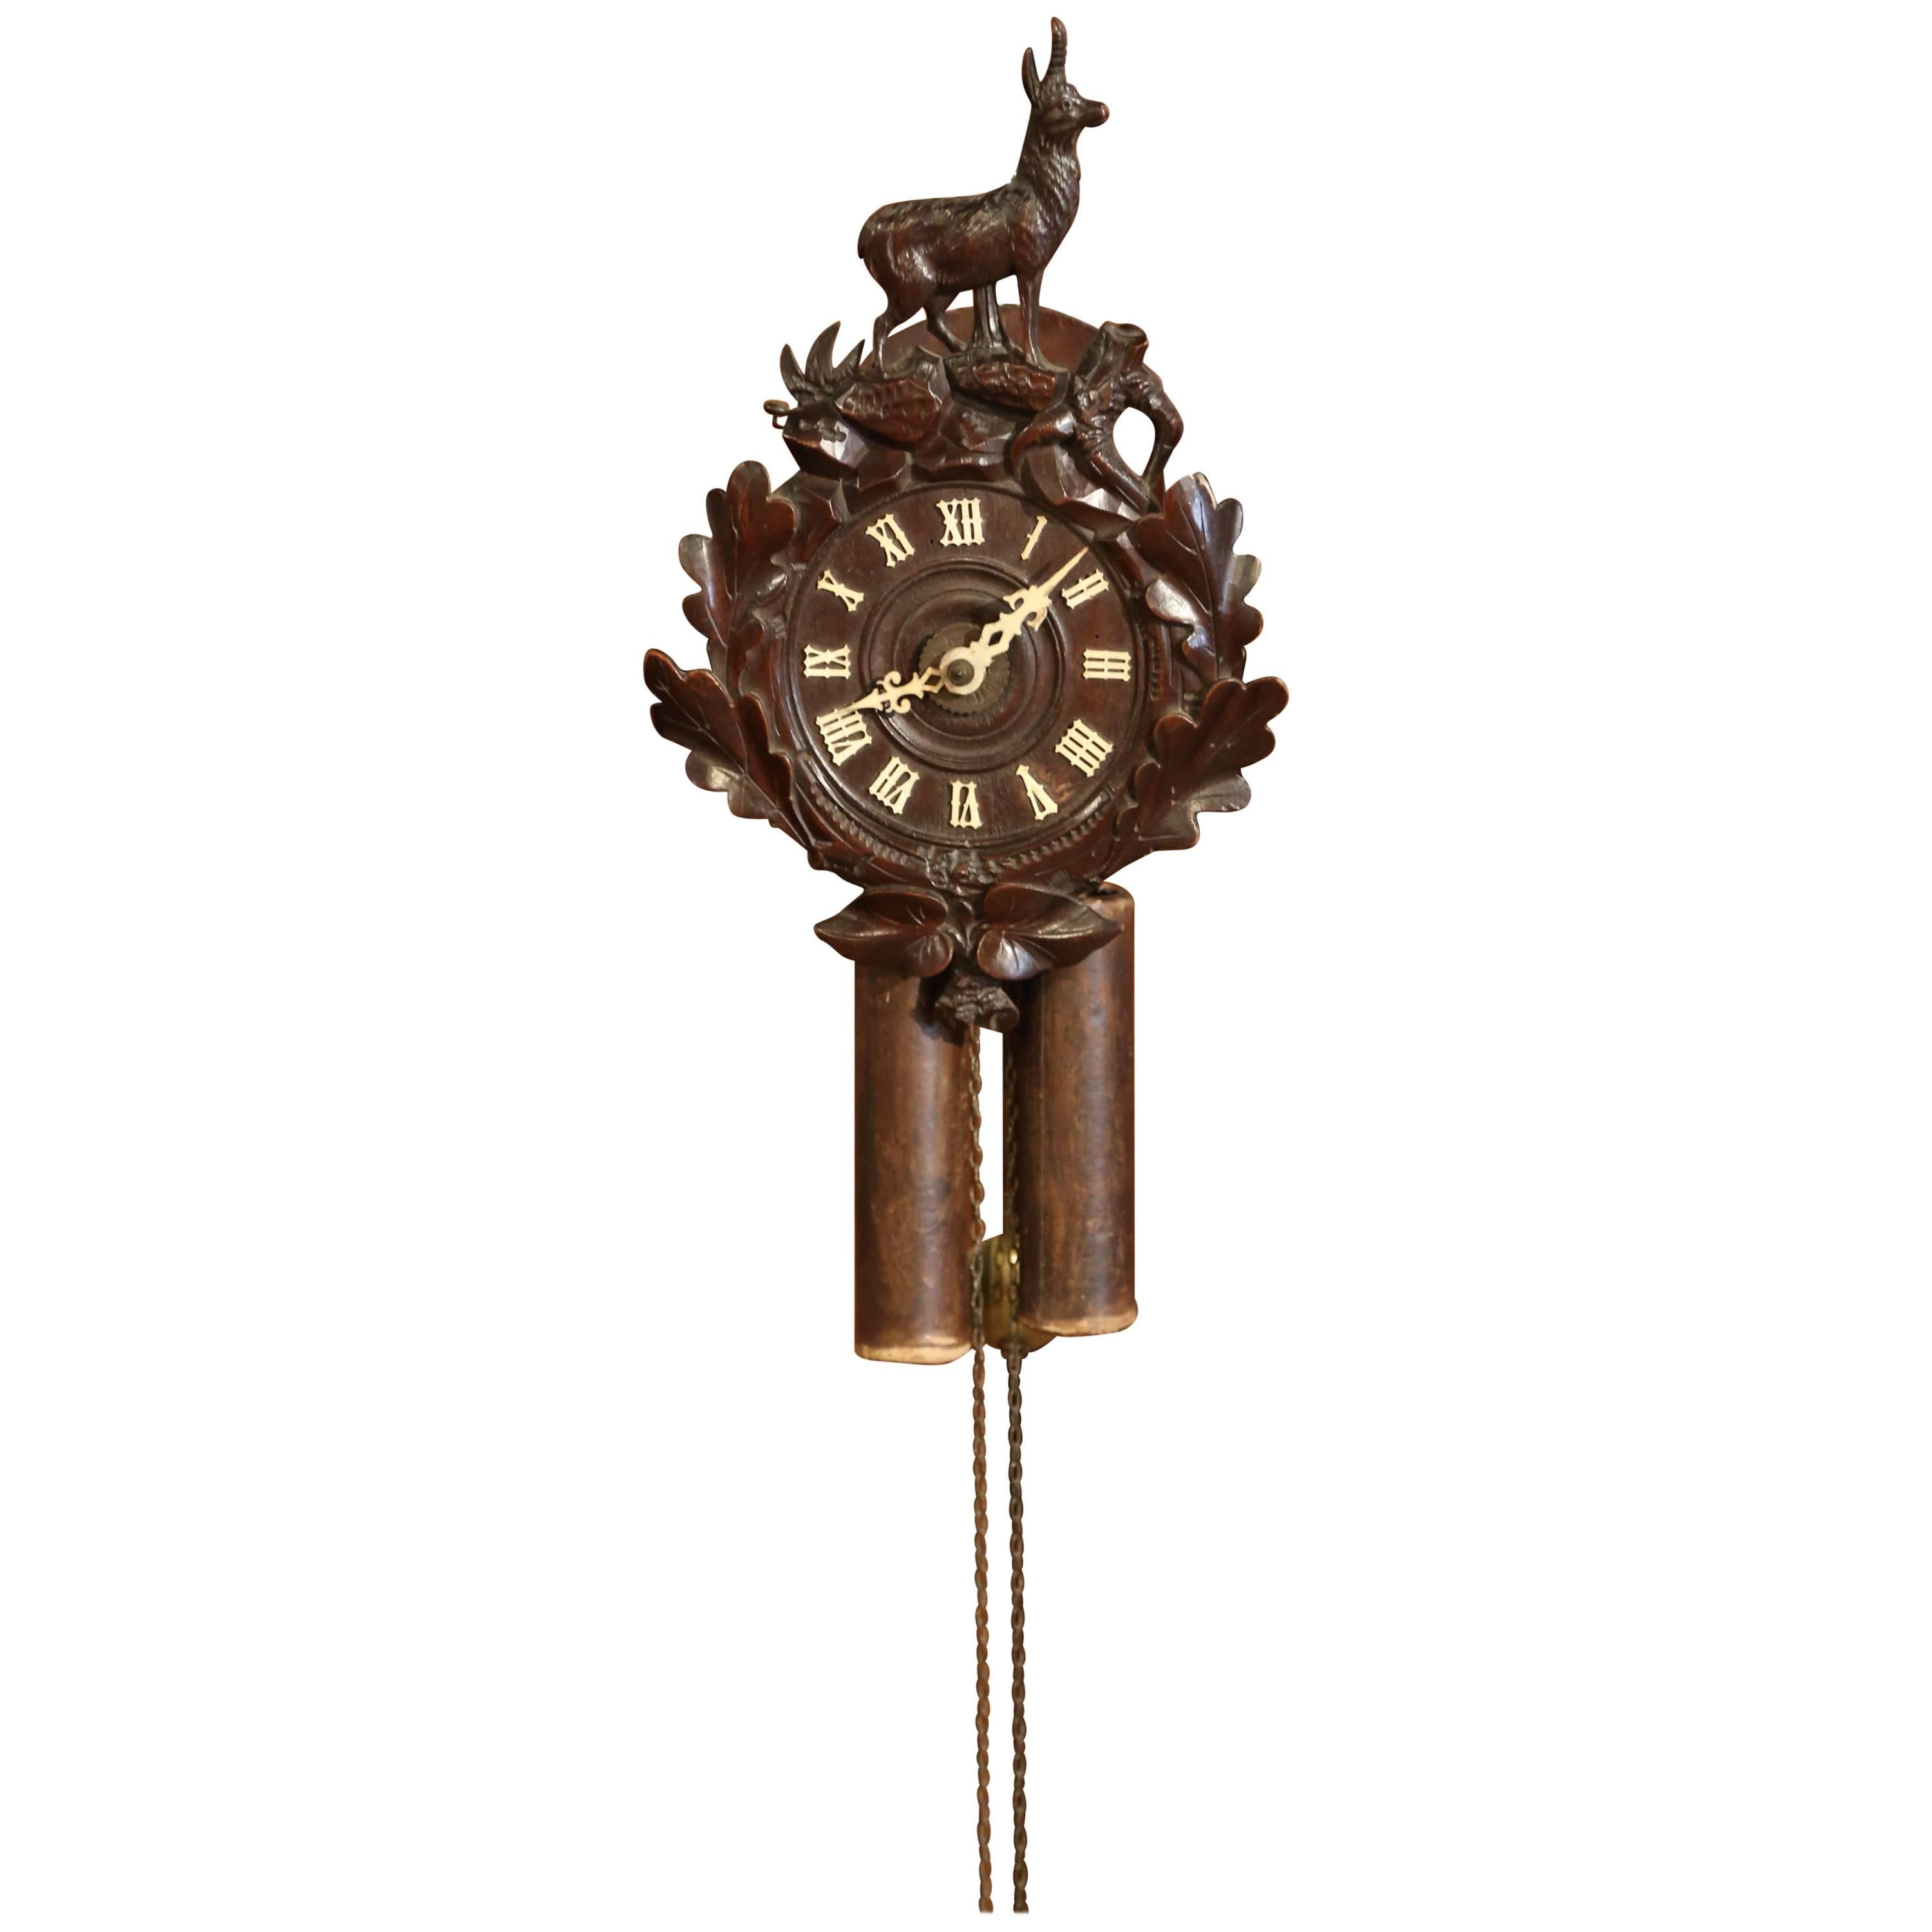 19th Century French Black Forest Carved Walnut Wall Clock with Deer